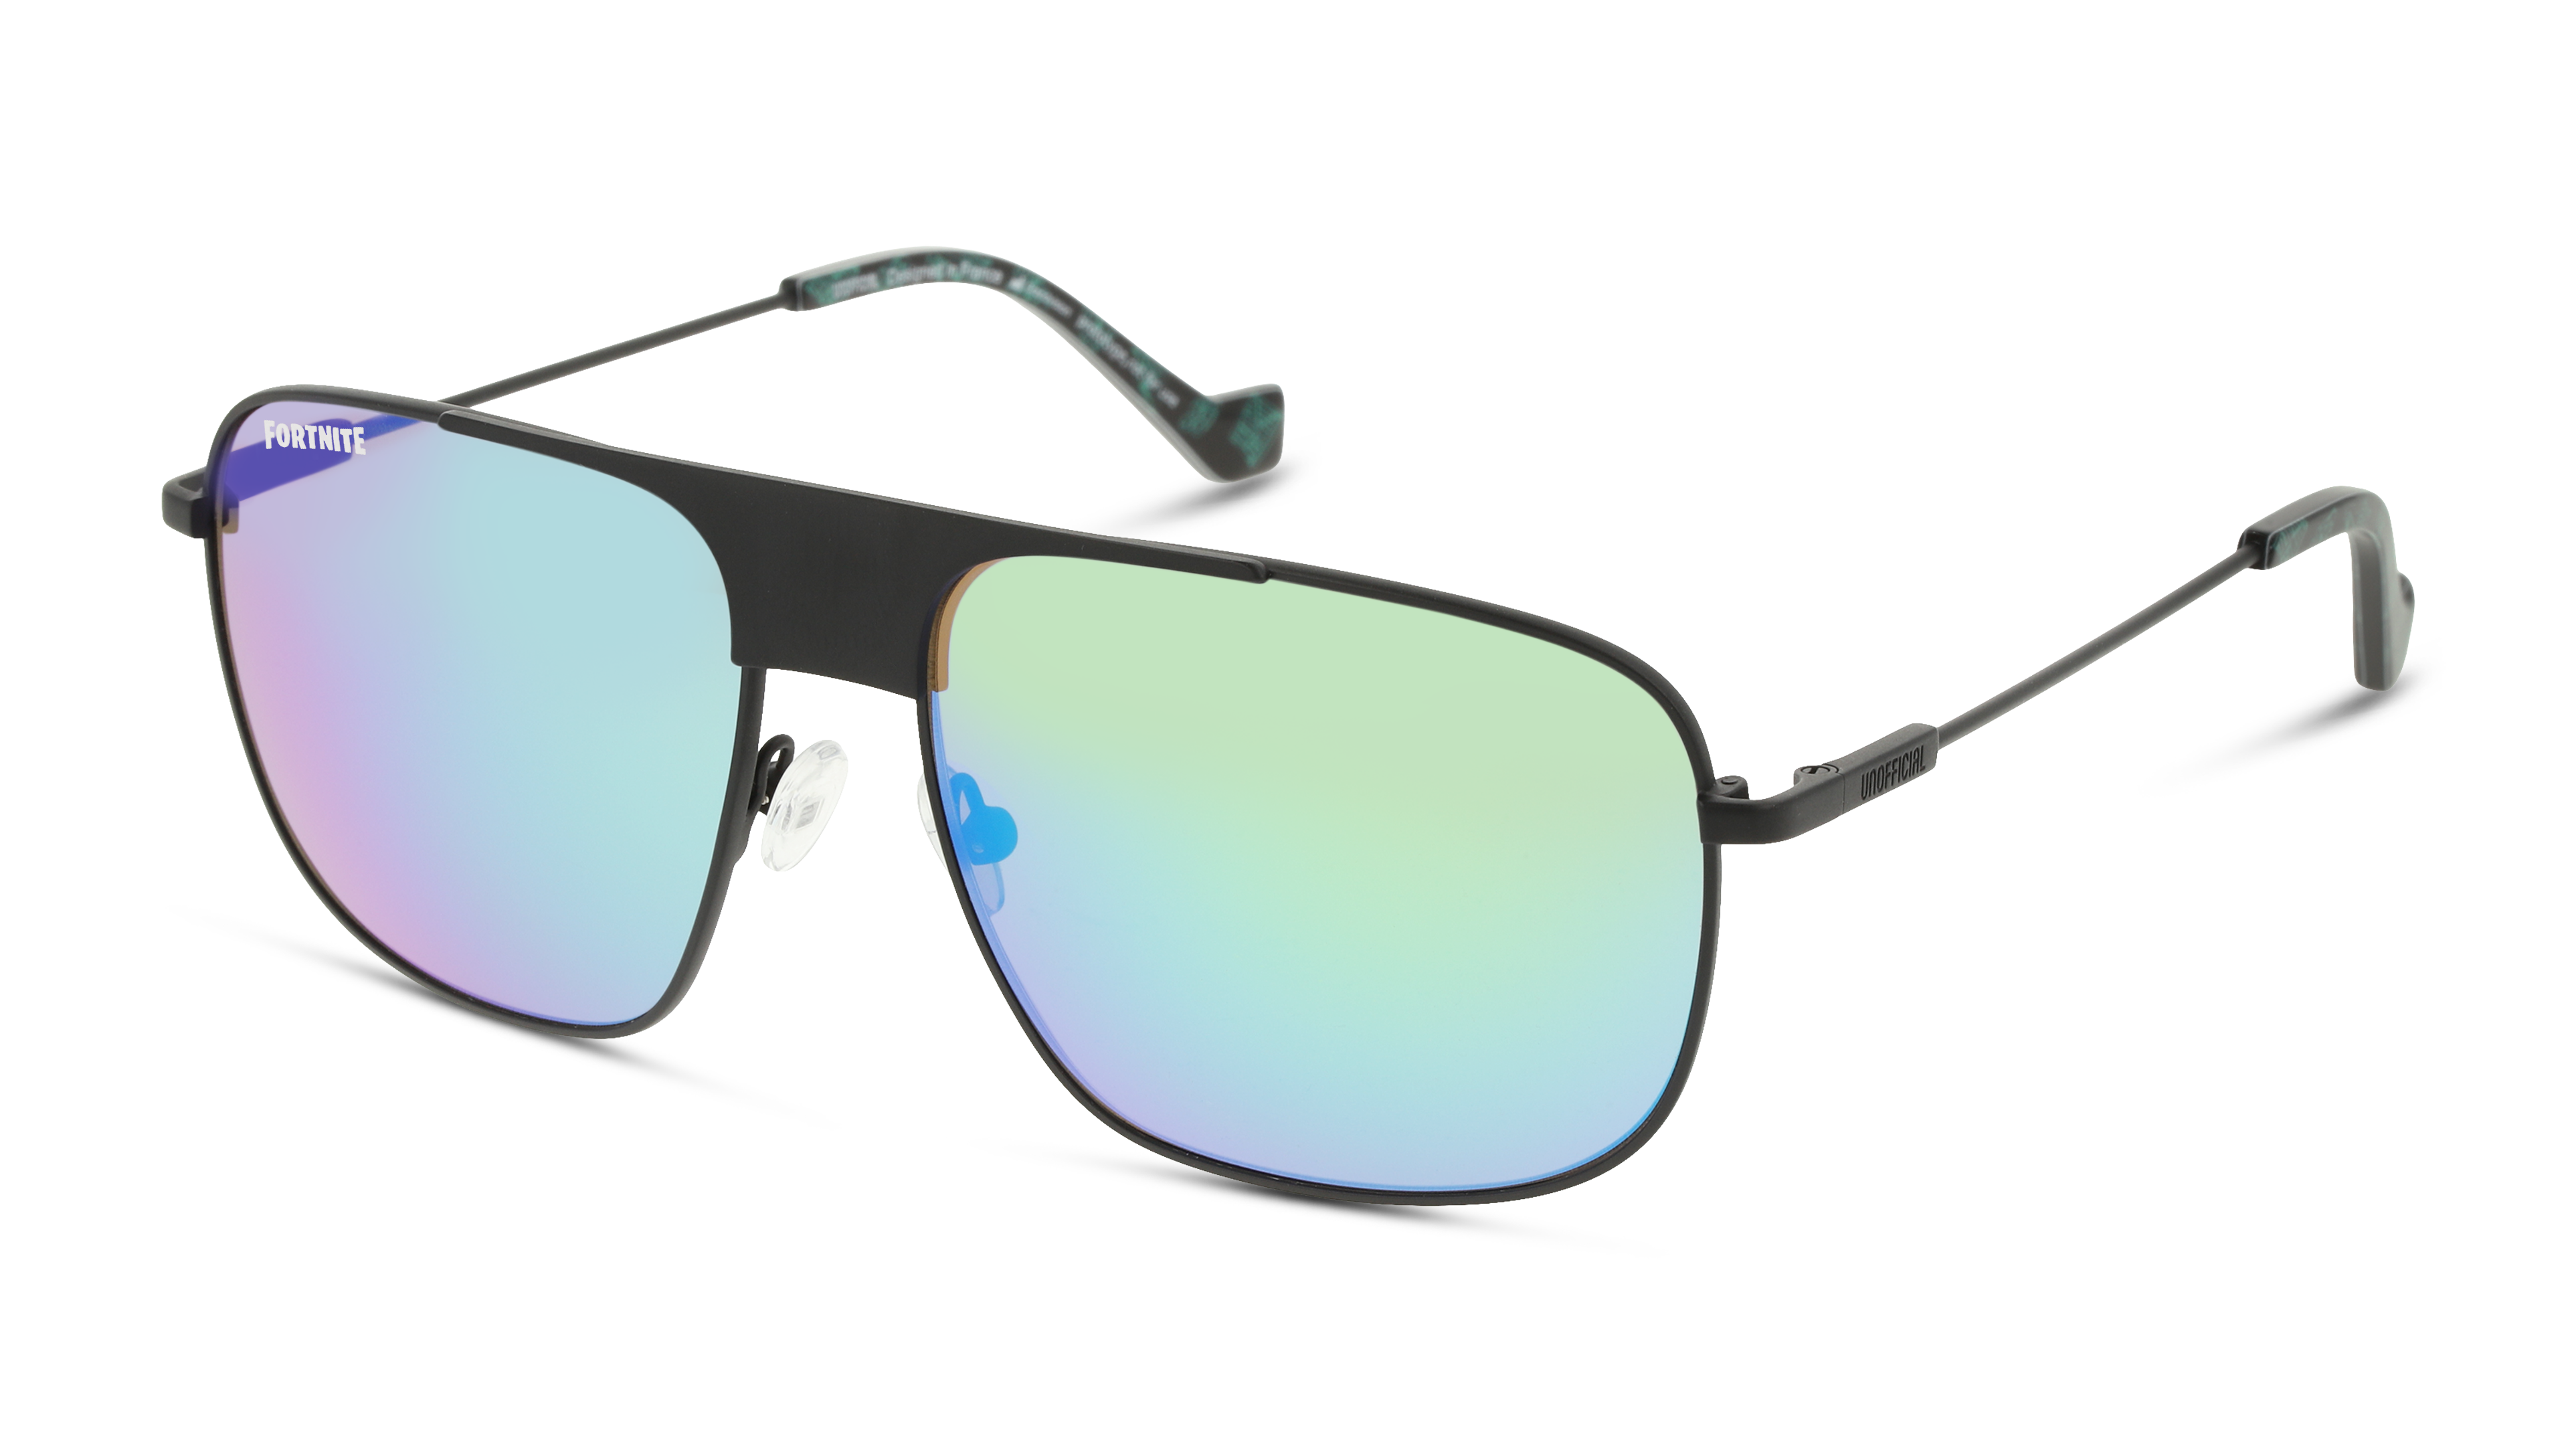 Angle_Left01 Fortnite with Unofficial UNSU0153 Sunglasses Green / Black